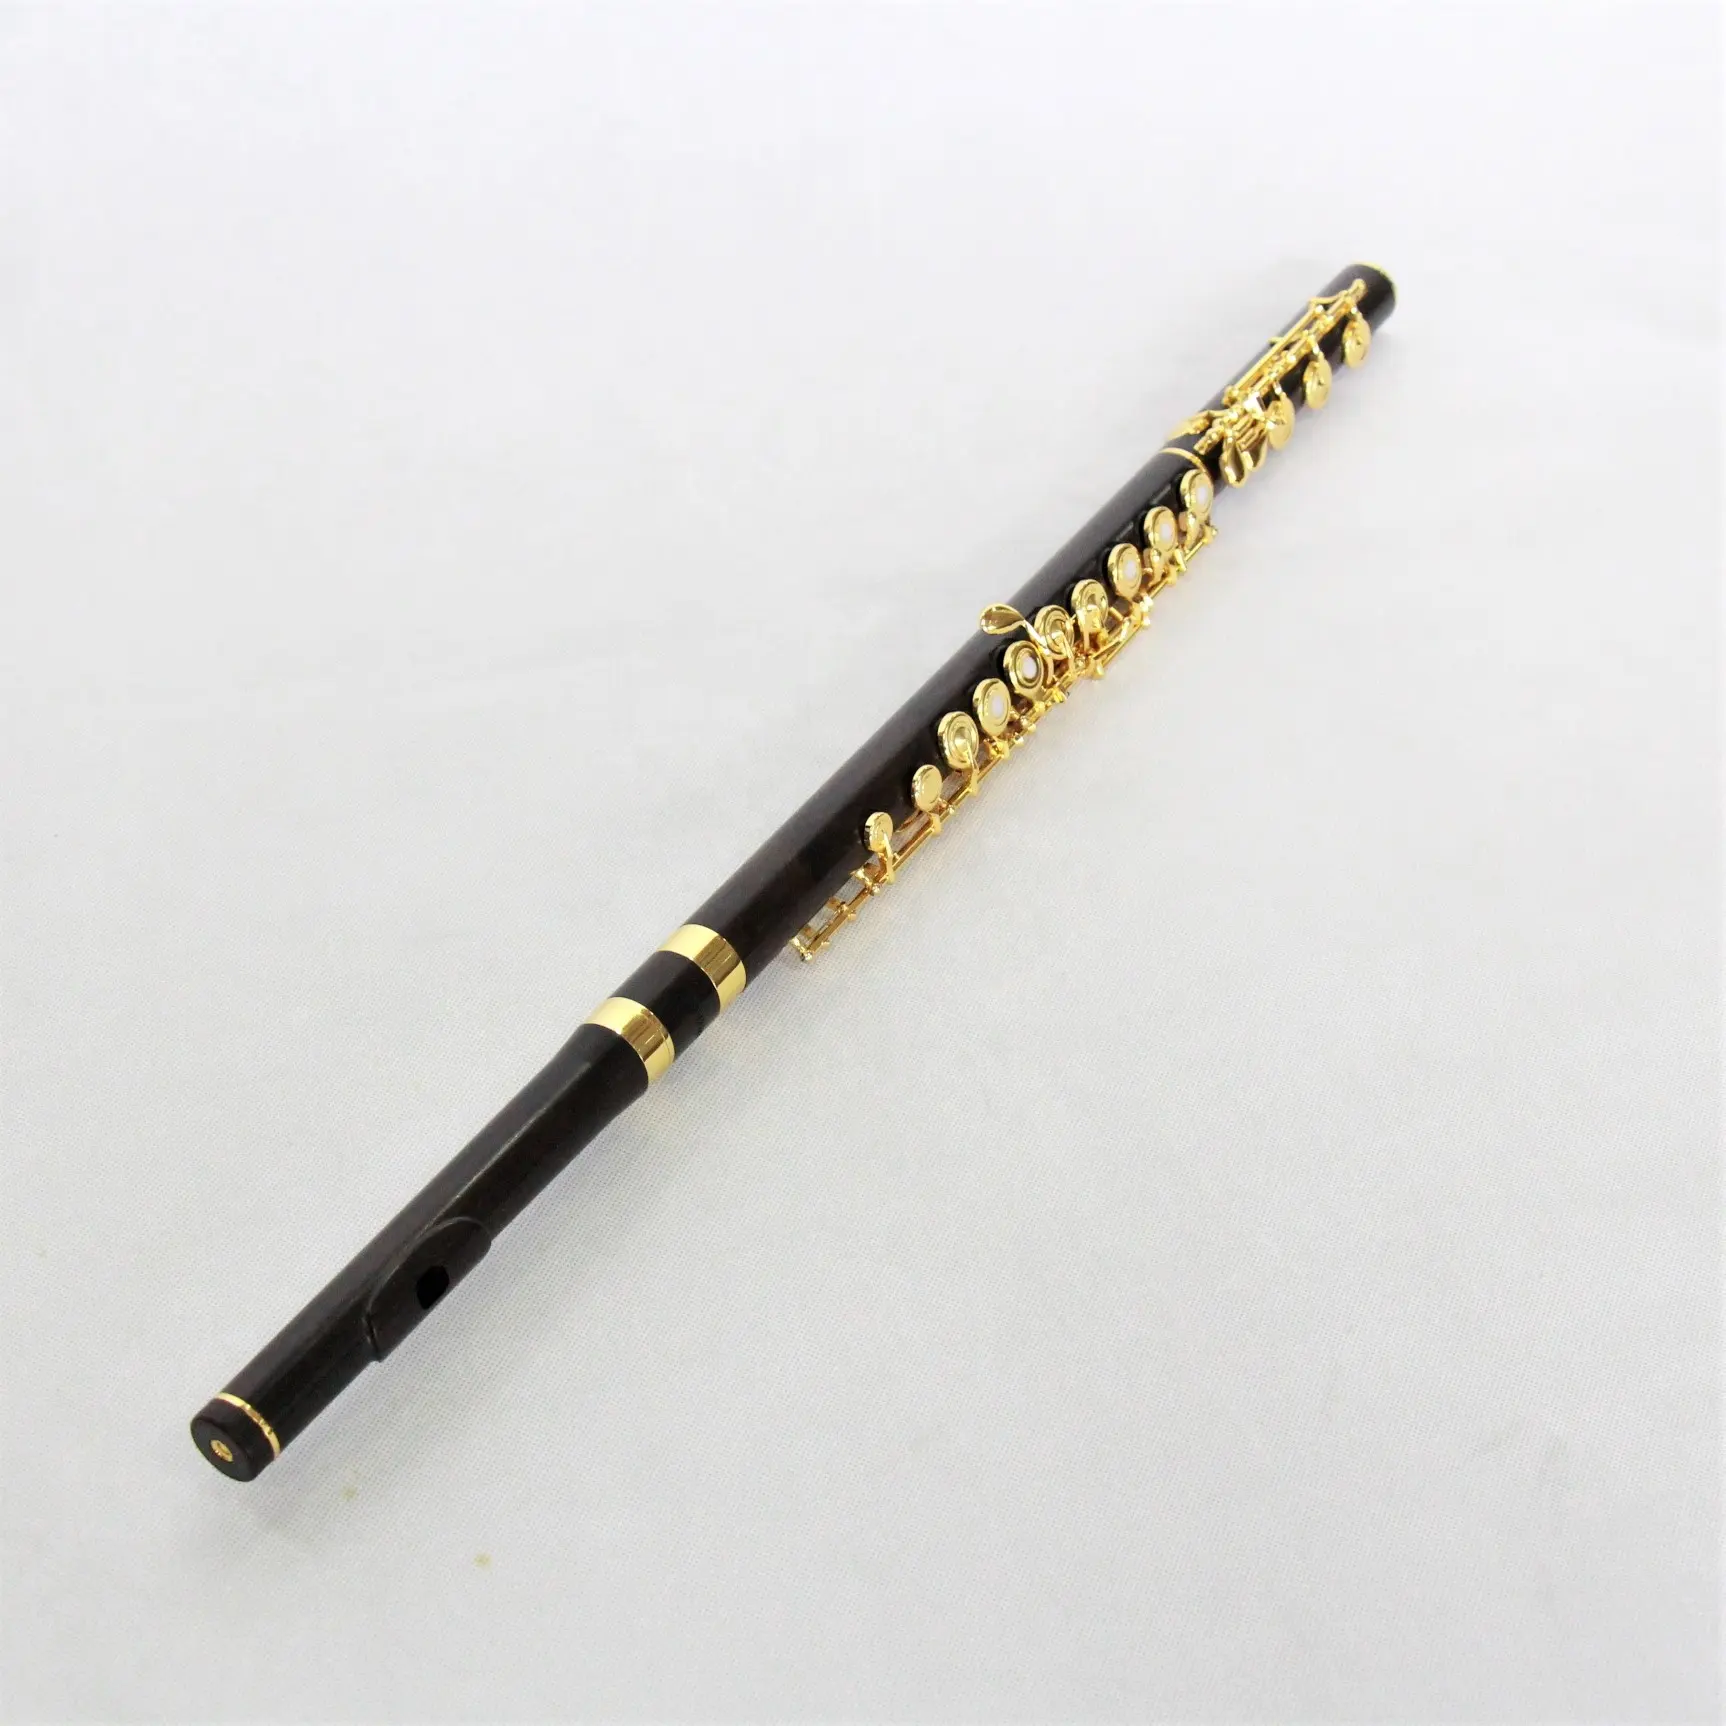 Chinese flute high grade flute music instrument gold plated ebony flute